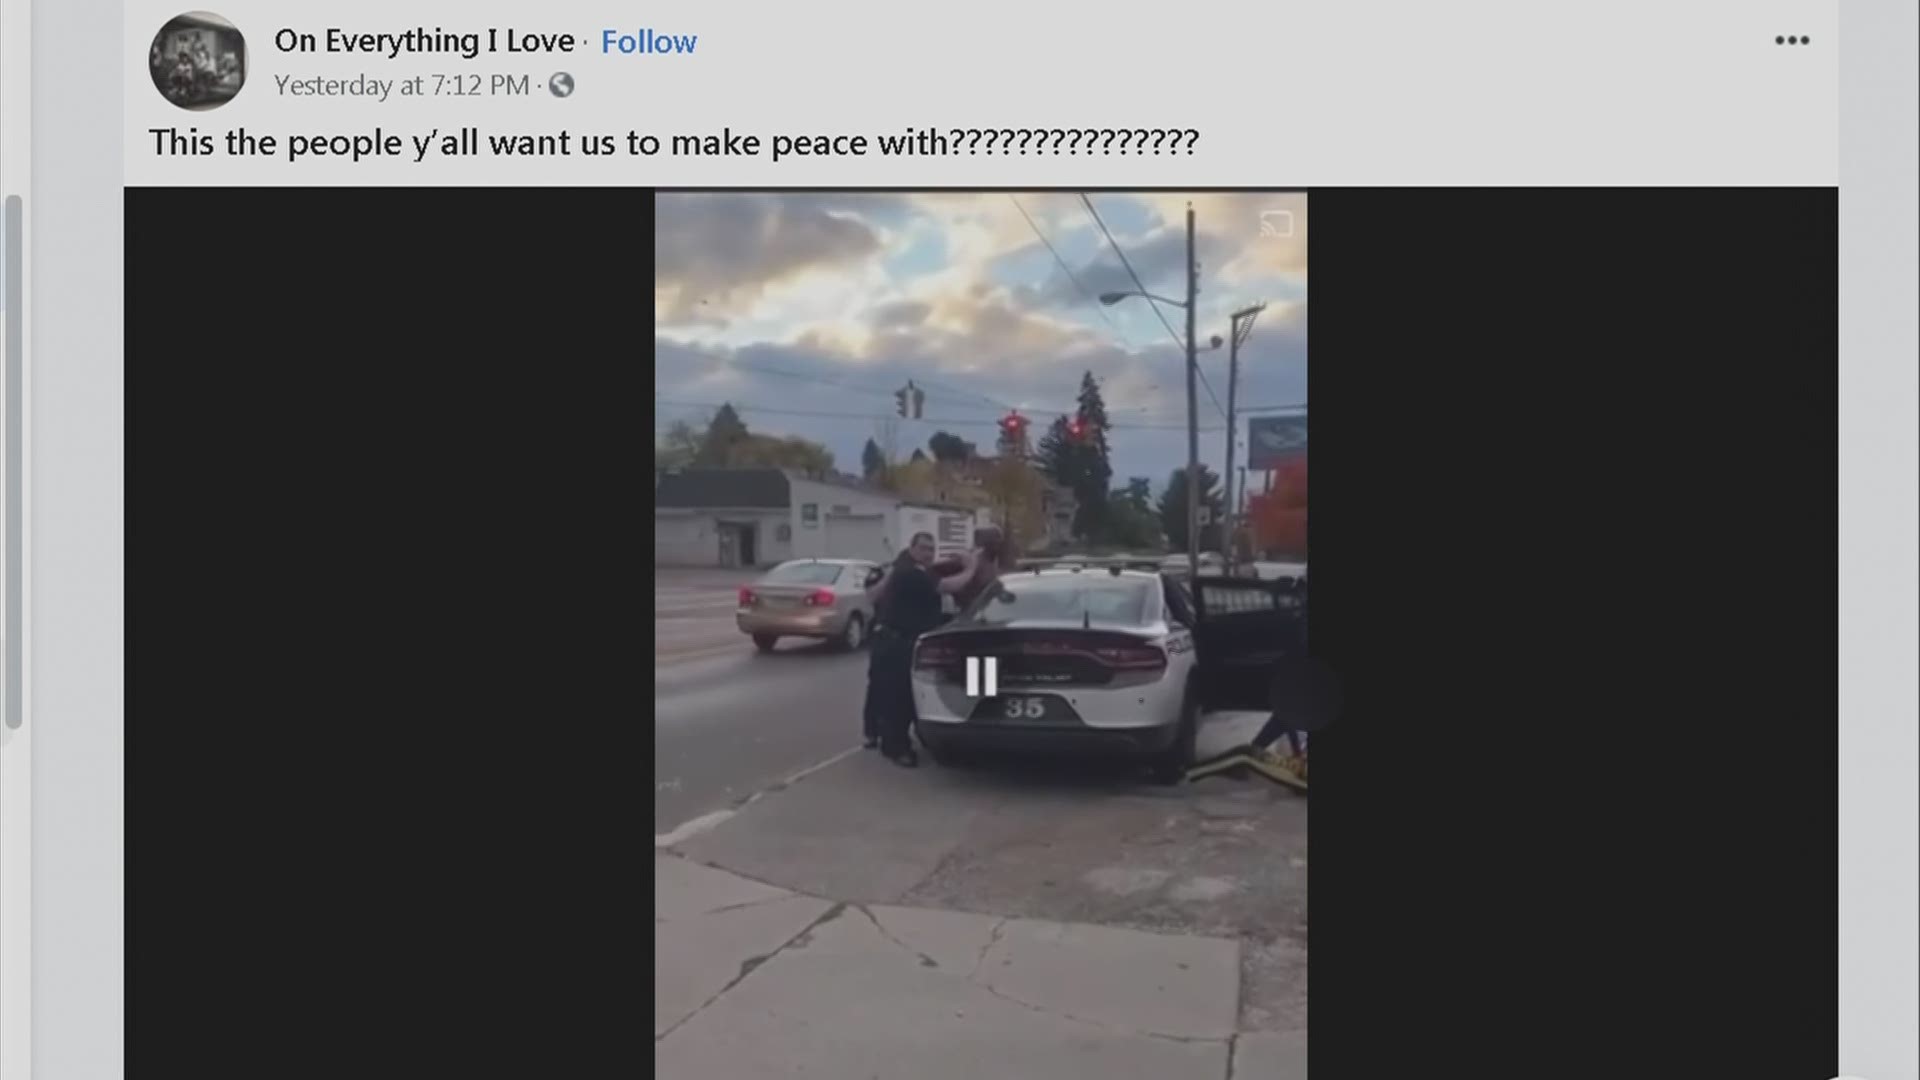 Video of man being arrested causes controversy on social media.